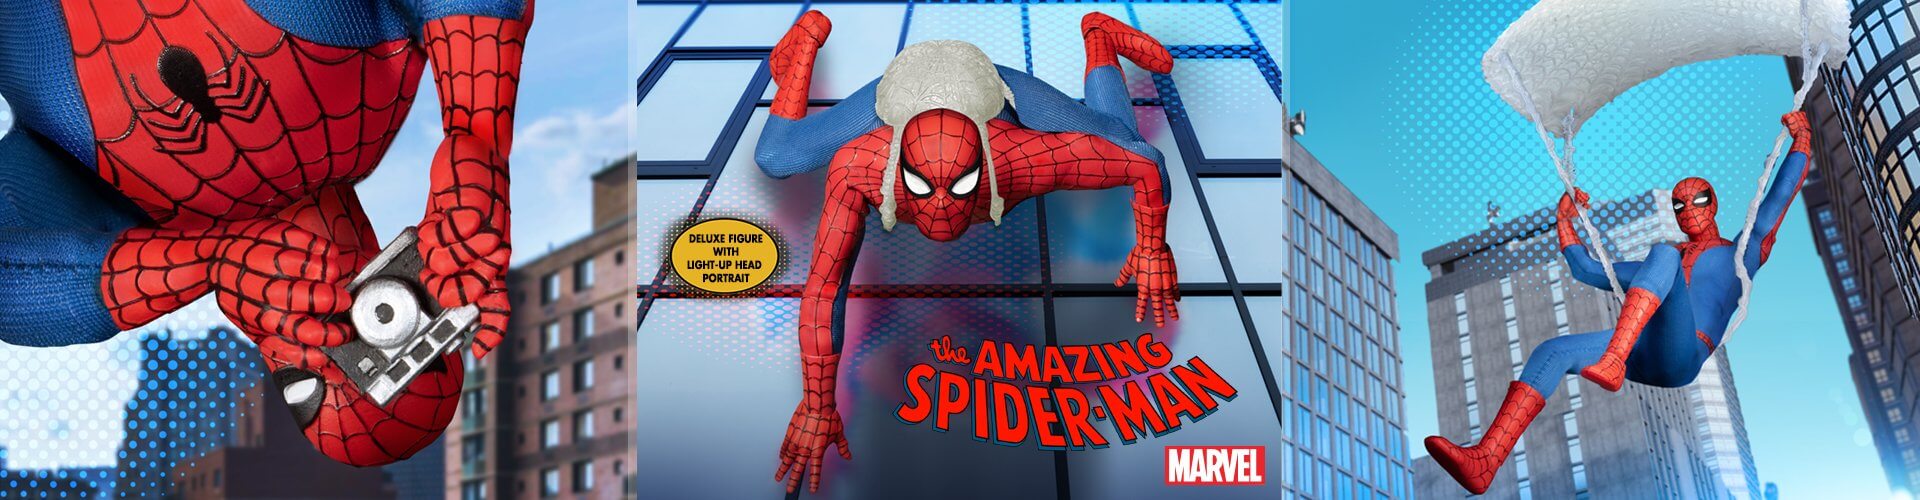 Mezco One:12 Collective Amazing Spider-Man Deluxe Edition 